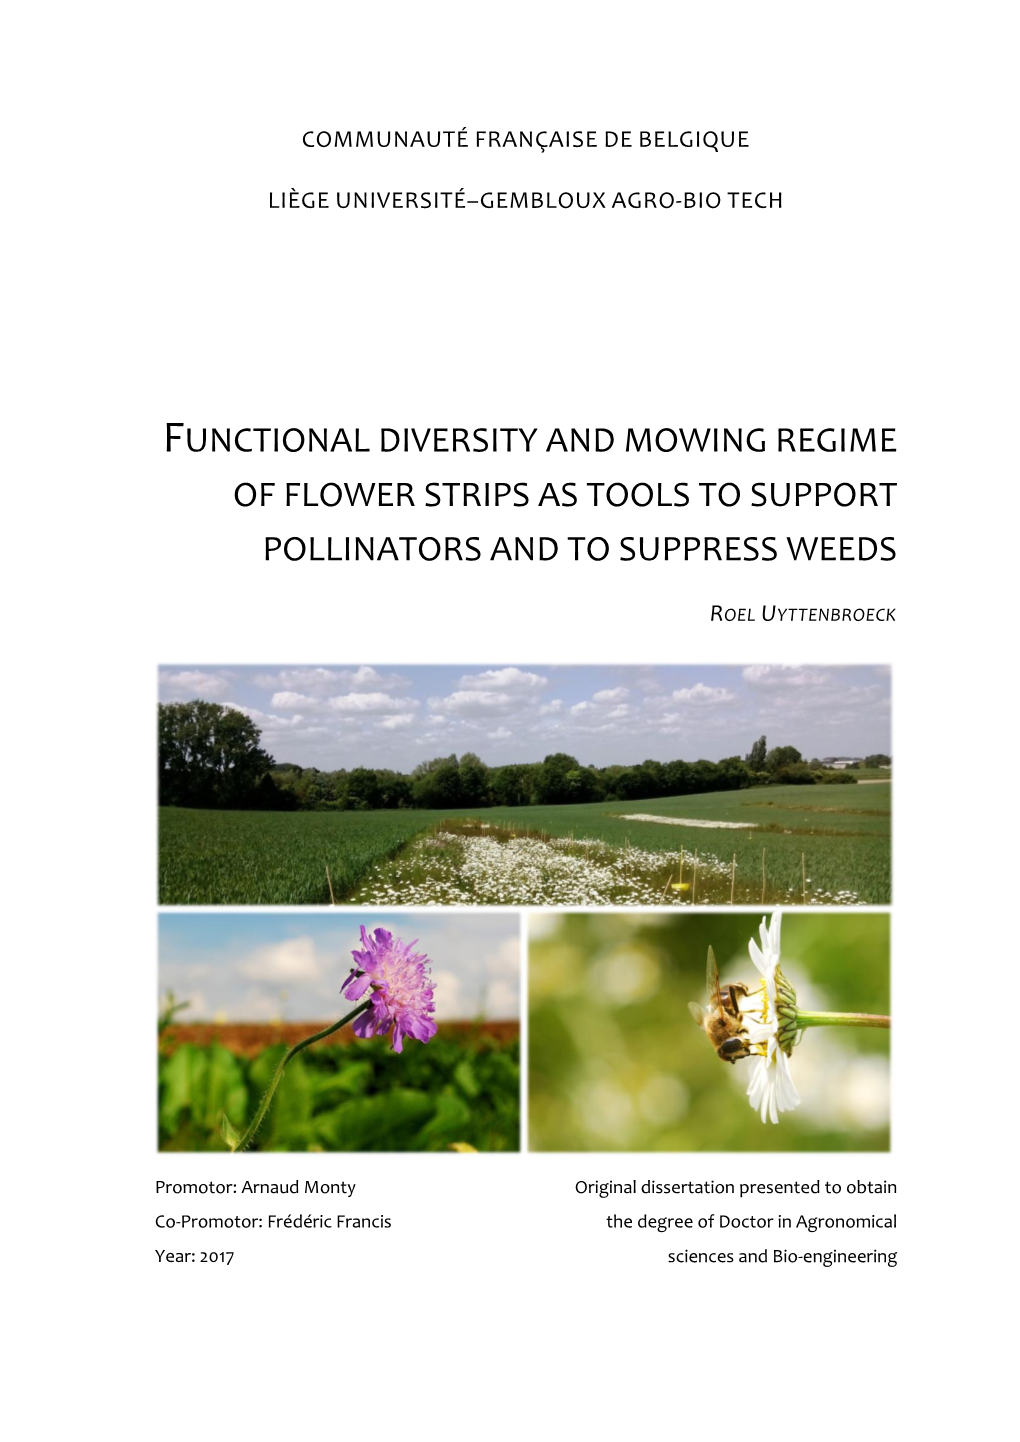 Functional Diversity and Mowing Regime of Flower Strips As Tools to Support Pollinators and to Suppress Weeds